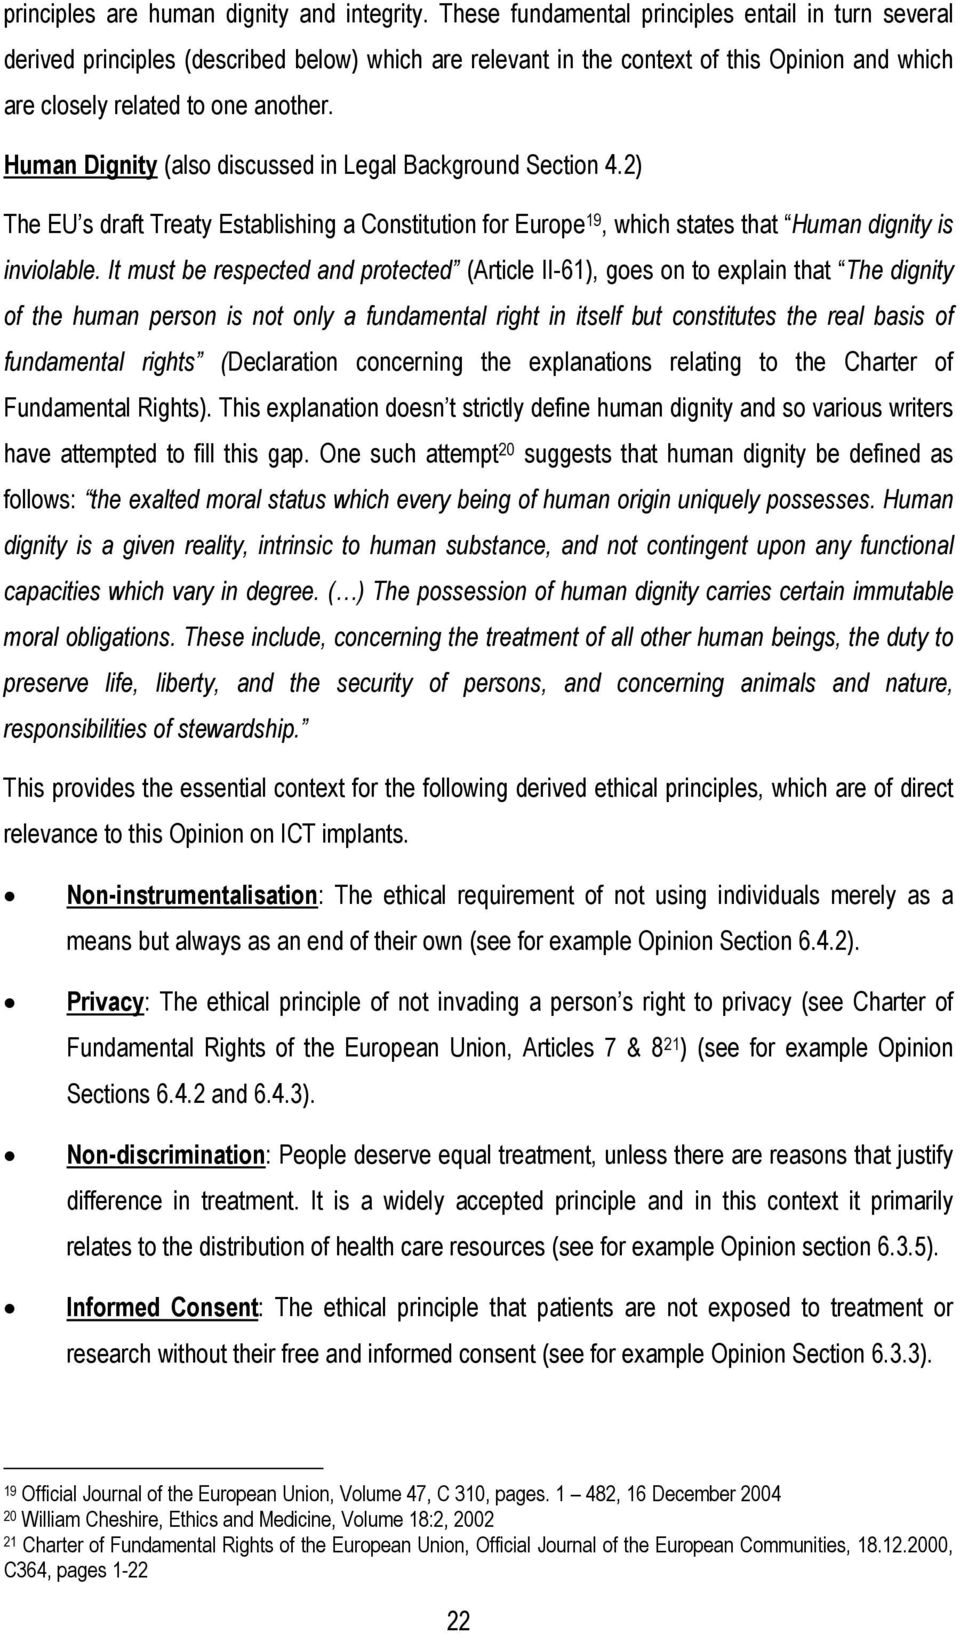 Human Dignity (also discussed in Legal Background Section 4.2) The EU s draft Treaty Establishing a Constitution for Europe 19, which states that Human dignity is inviolable.